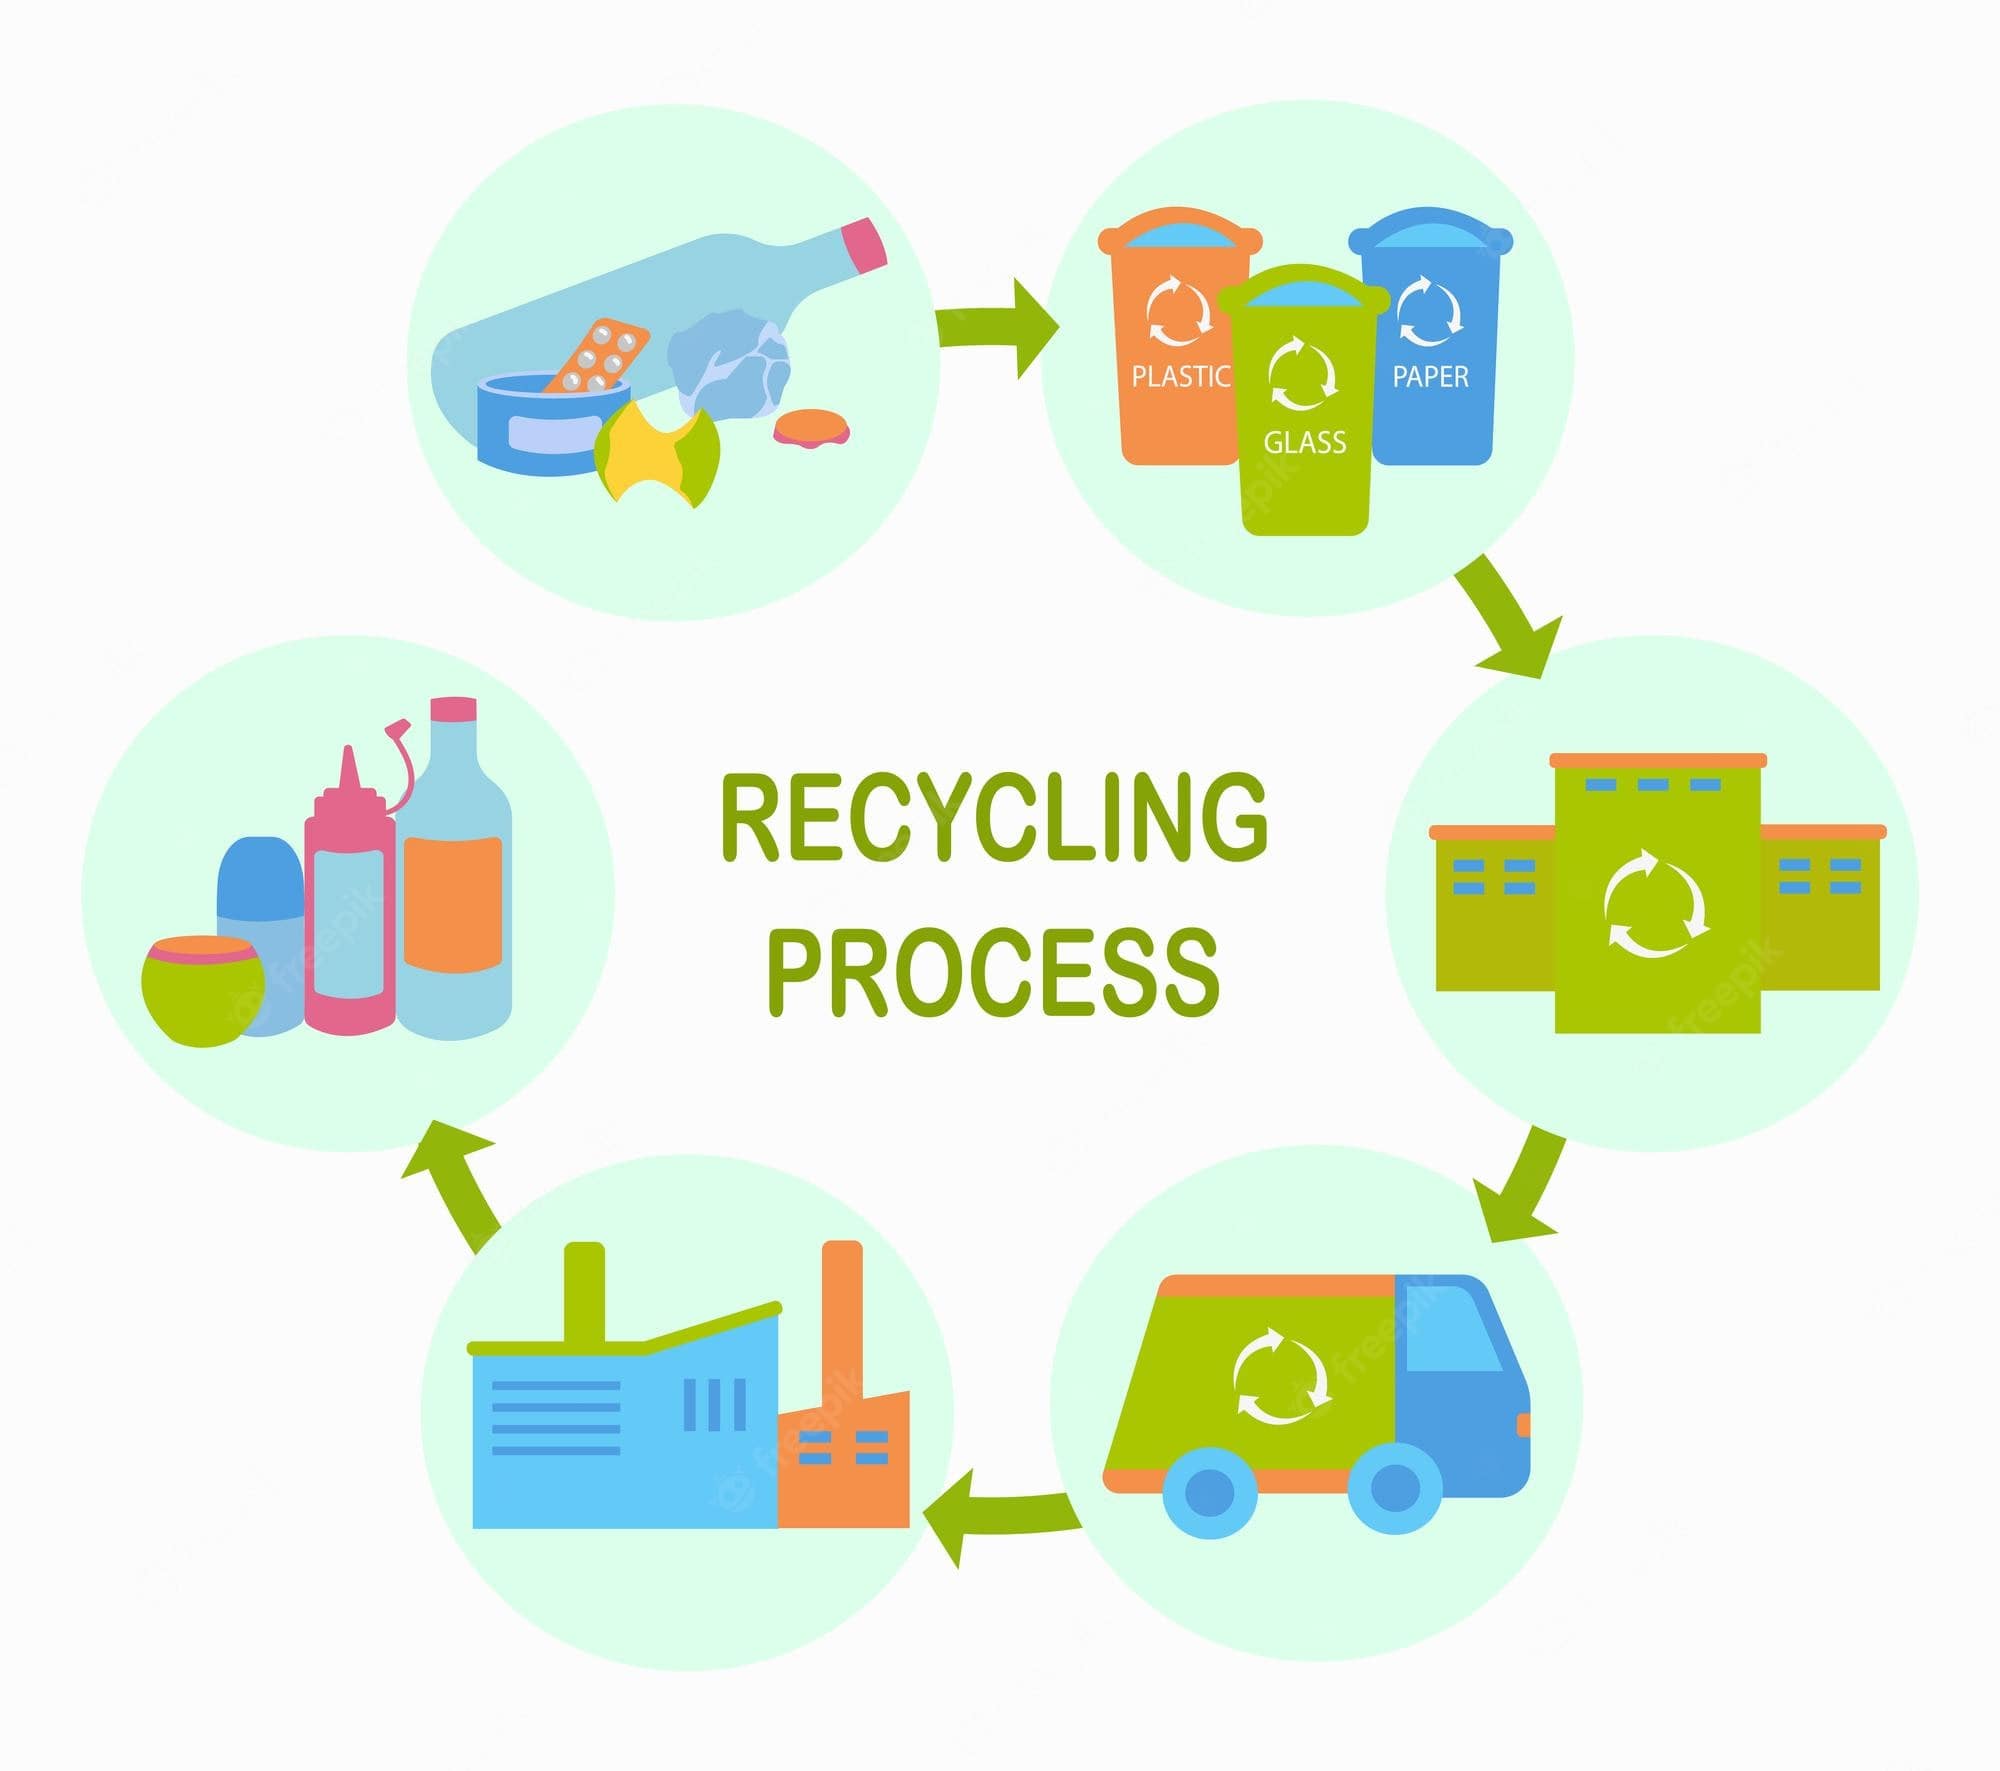 image for the process of recycling plastic